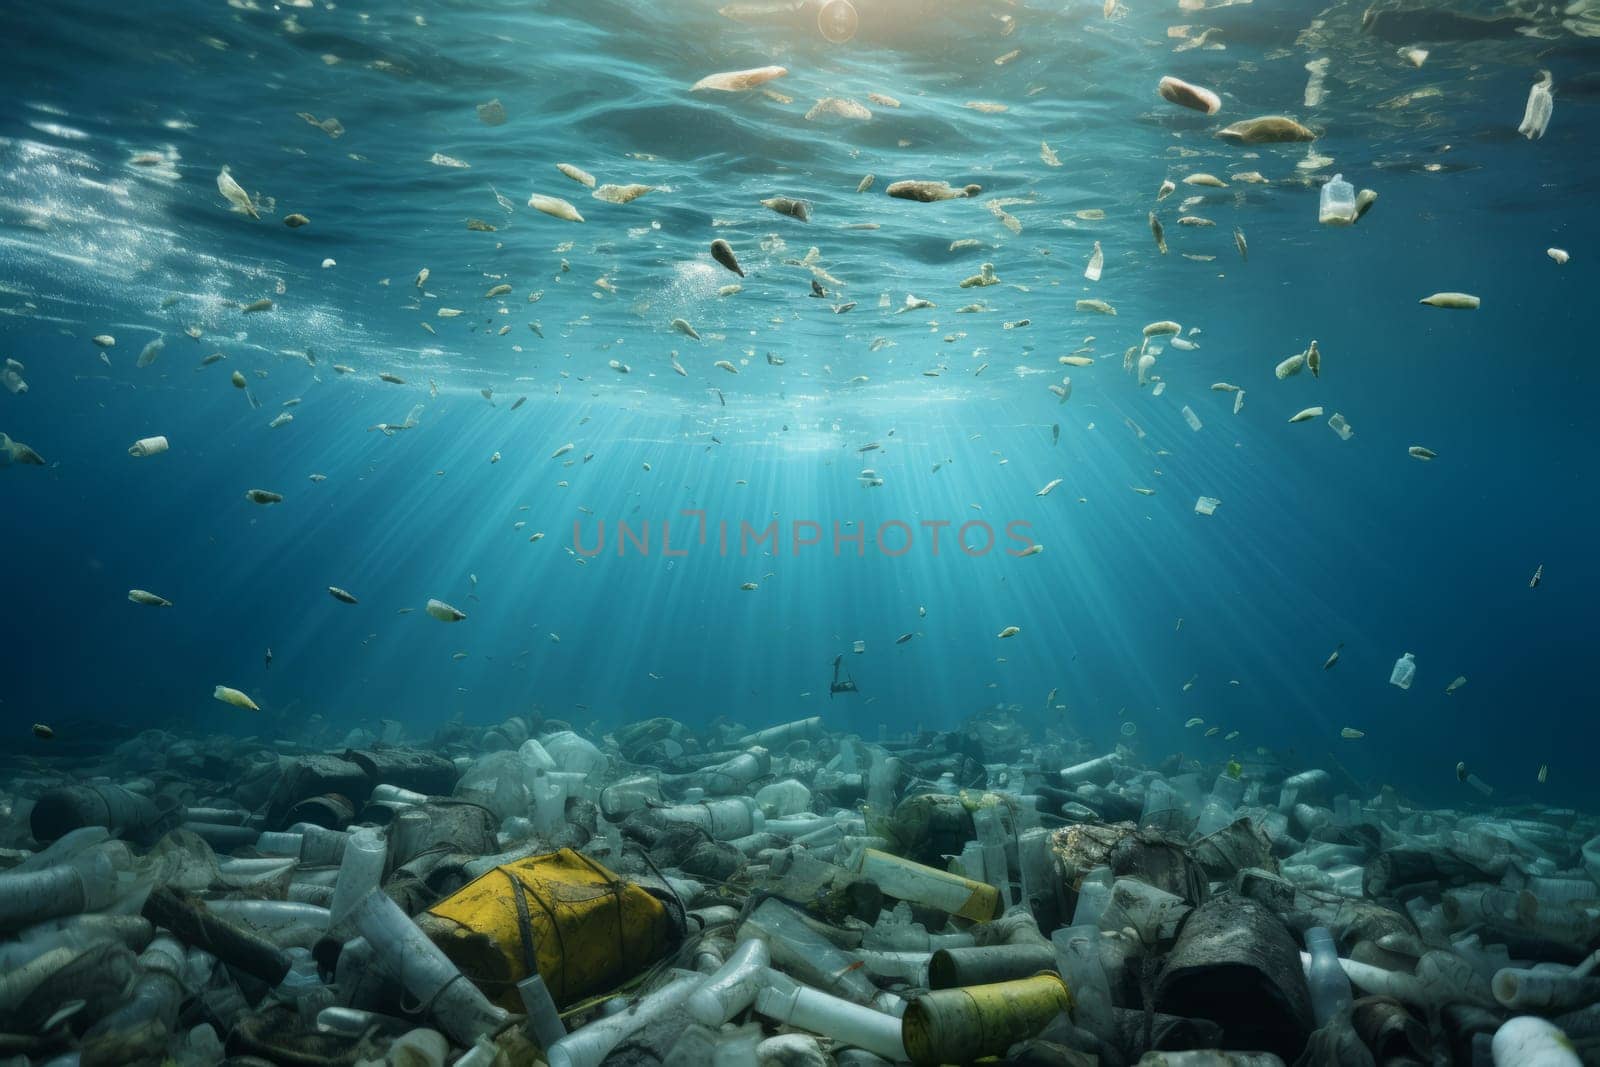 Plastic bottles and microplastics floating under the ocean